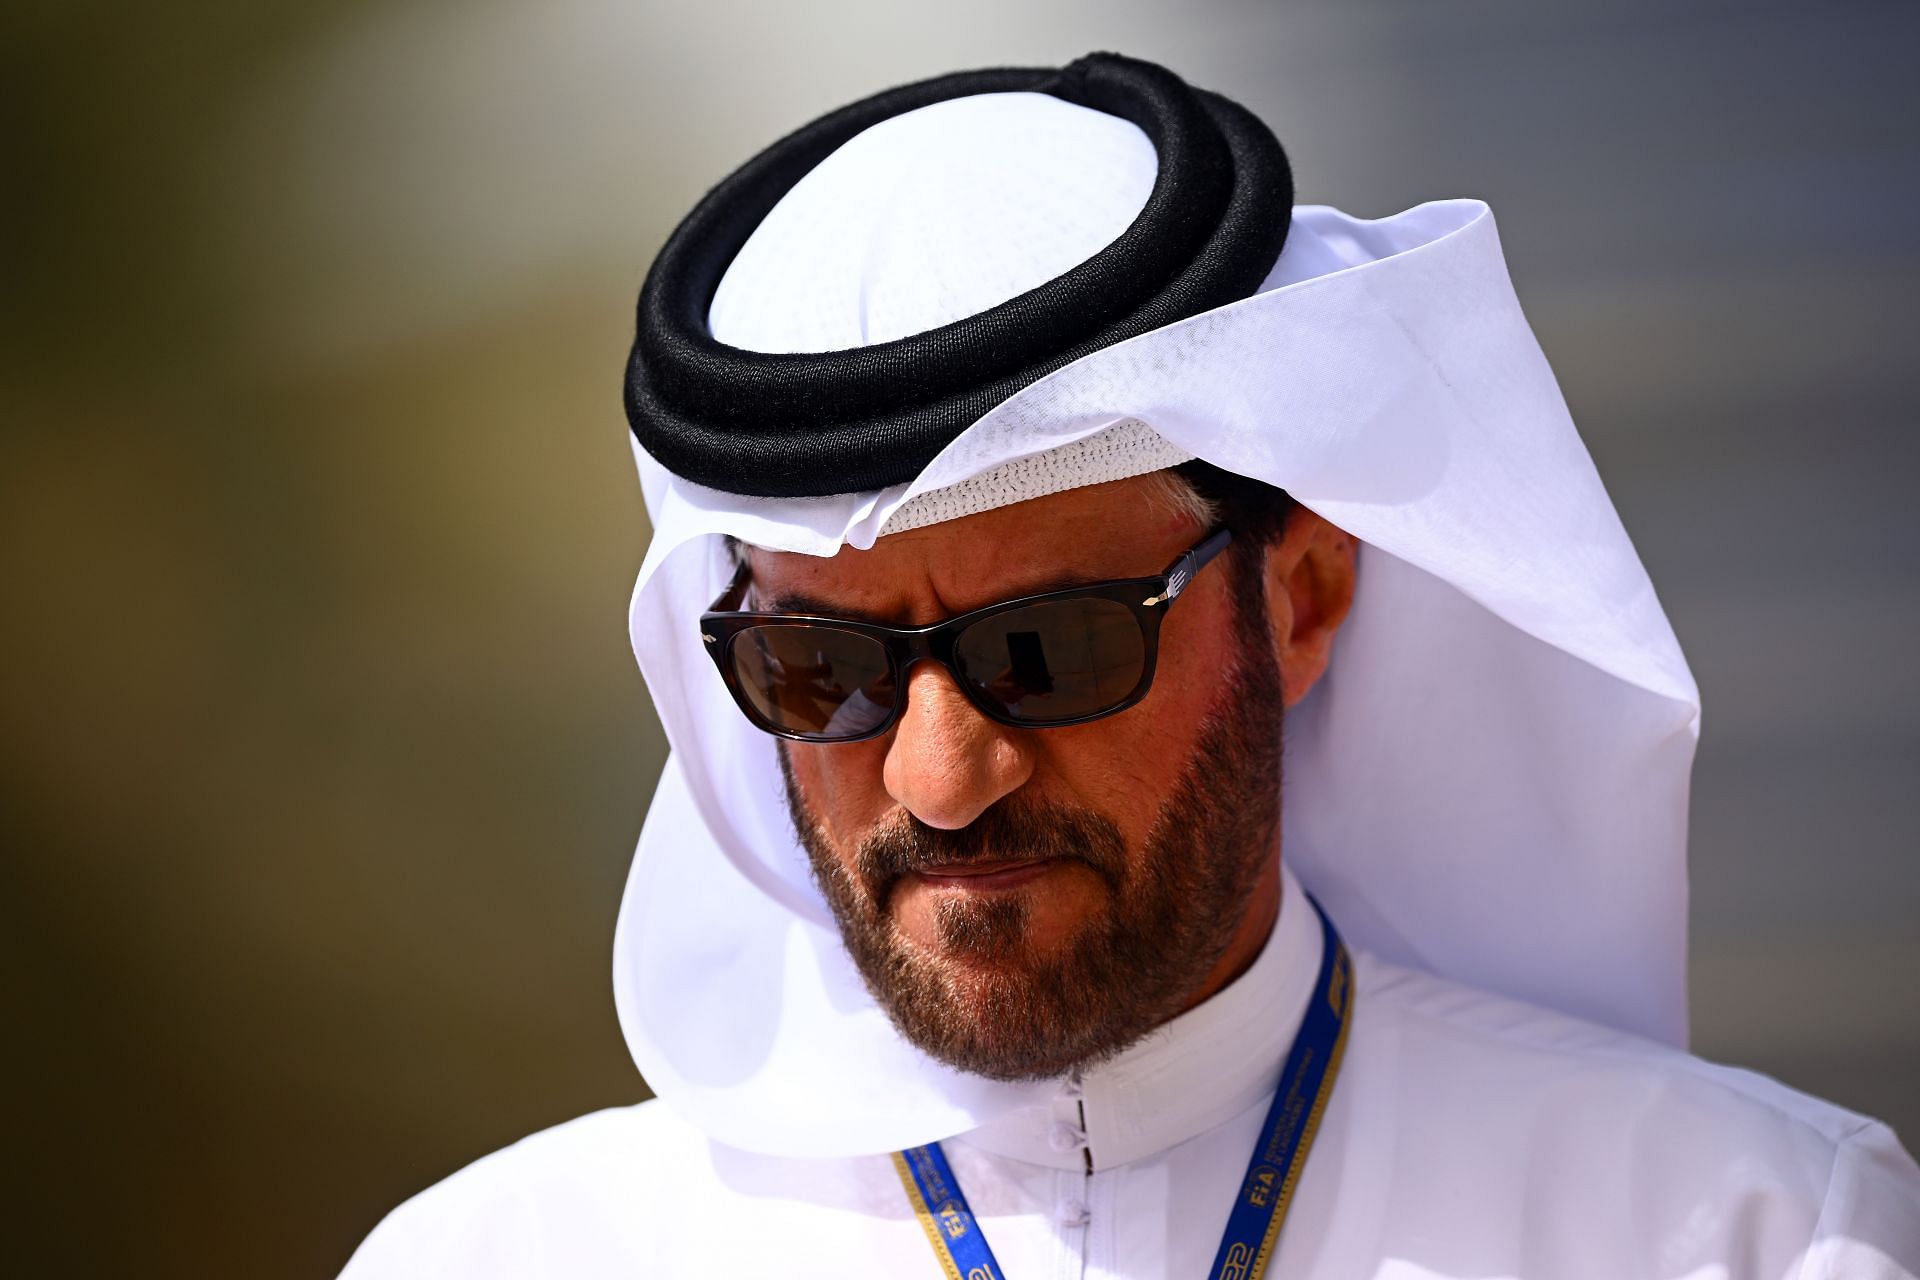 FIA president Mohammed Ben Sulayem at the F1 Grand Prix of Bahrain